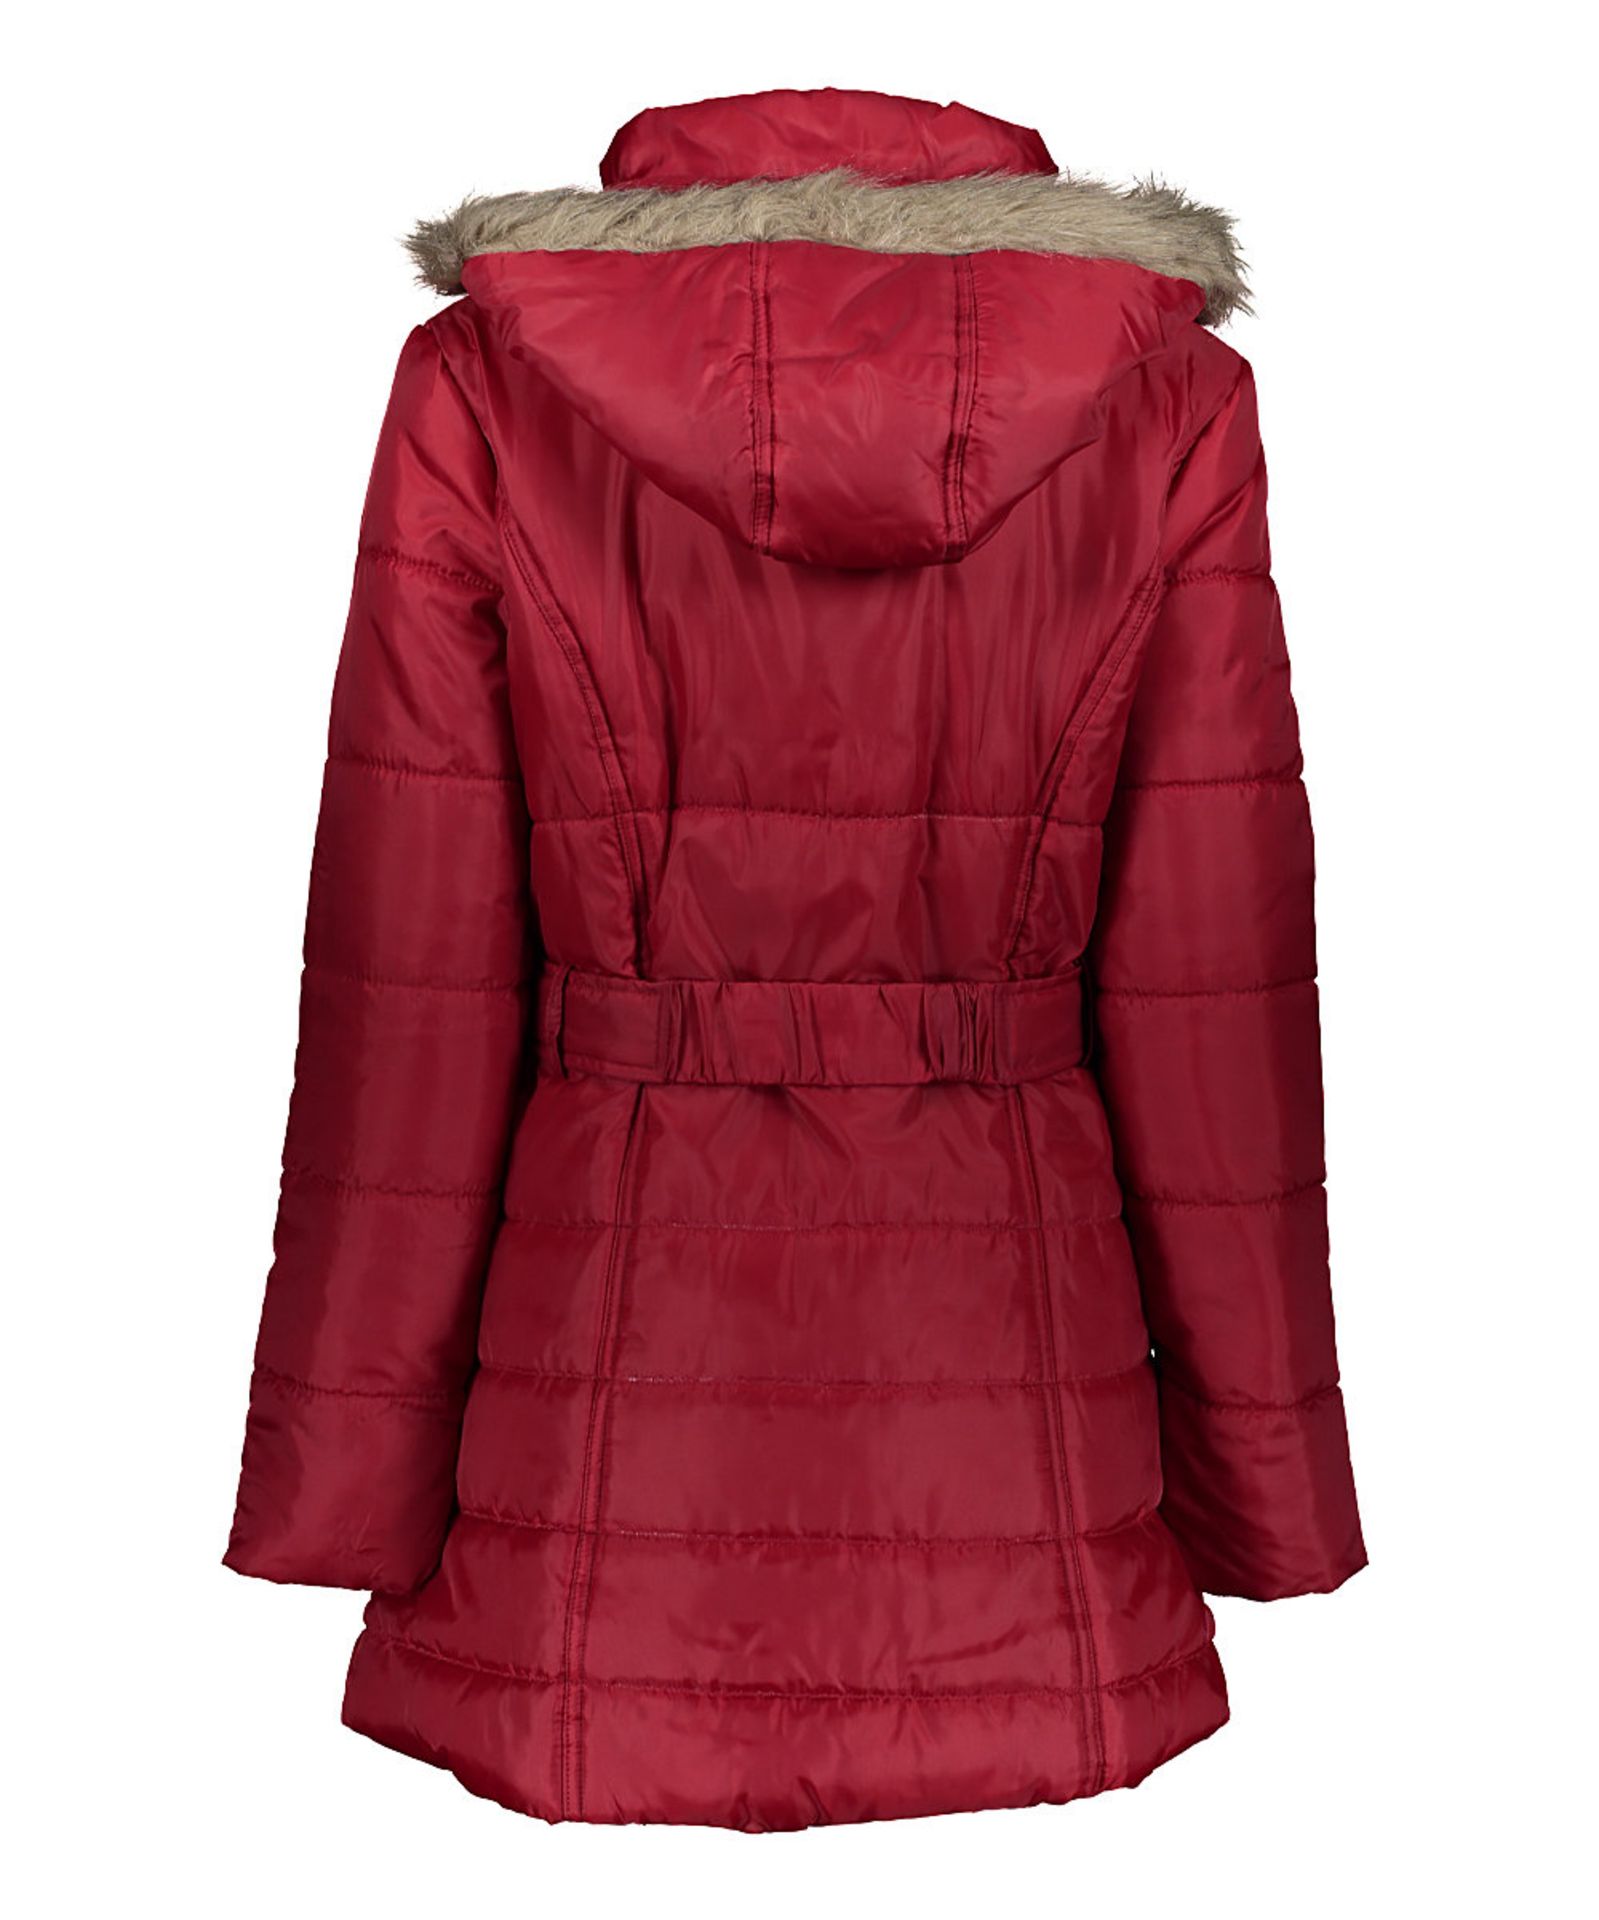 Red Toggle Puffer Coat (Us Size: M) [Ref: 39044320] - Image 2 of 2